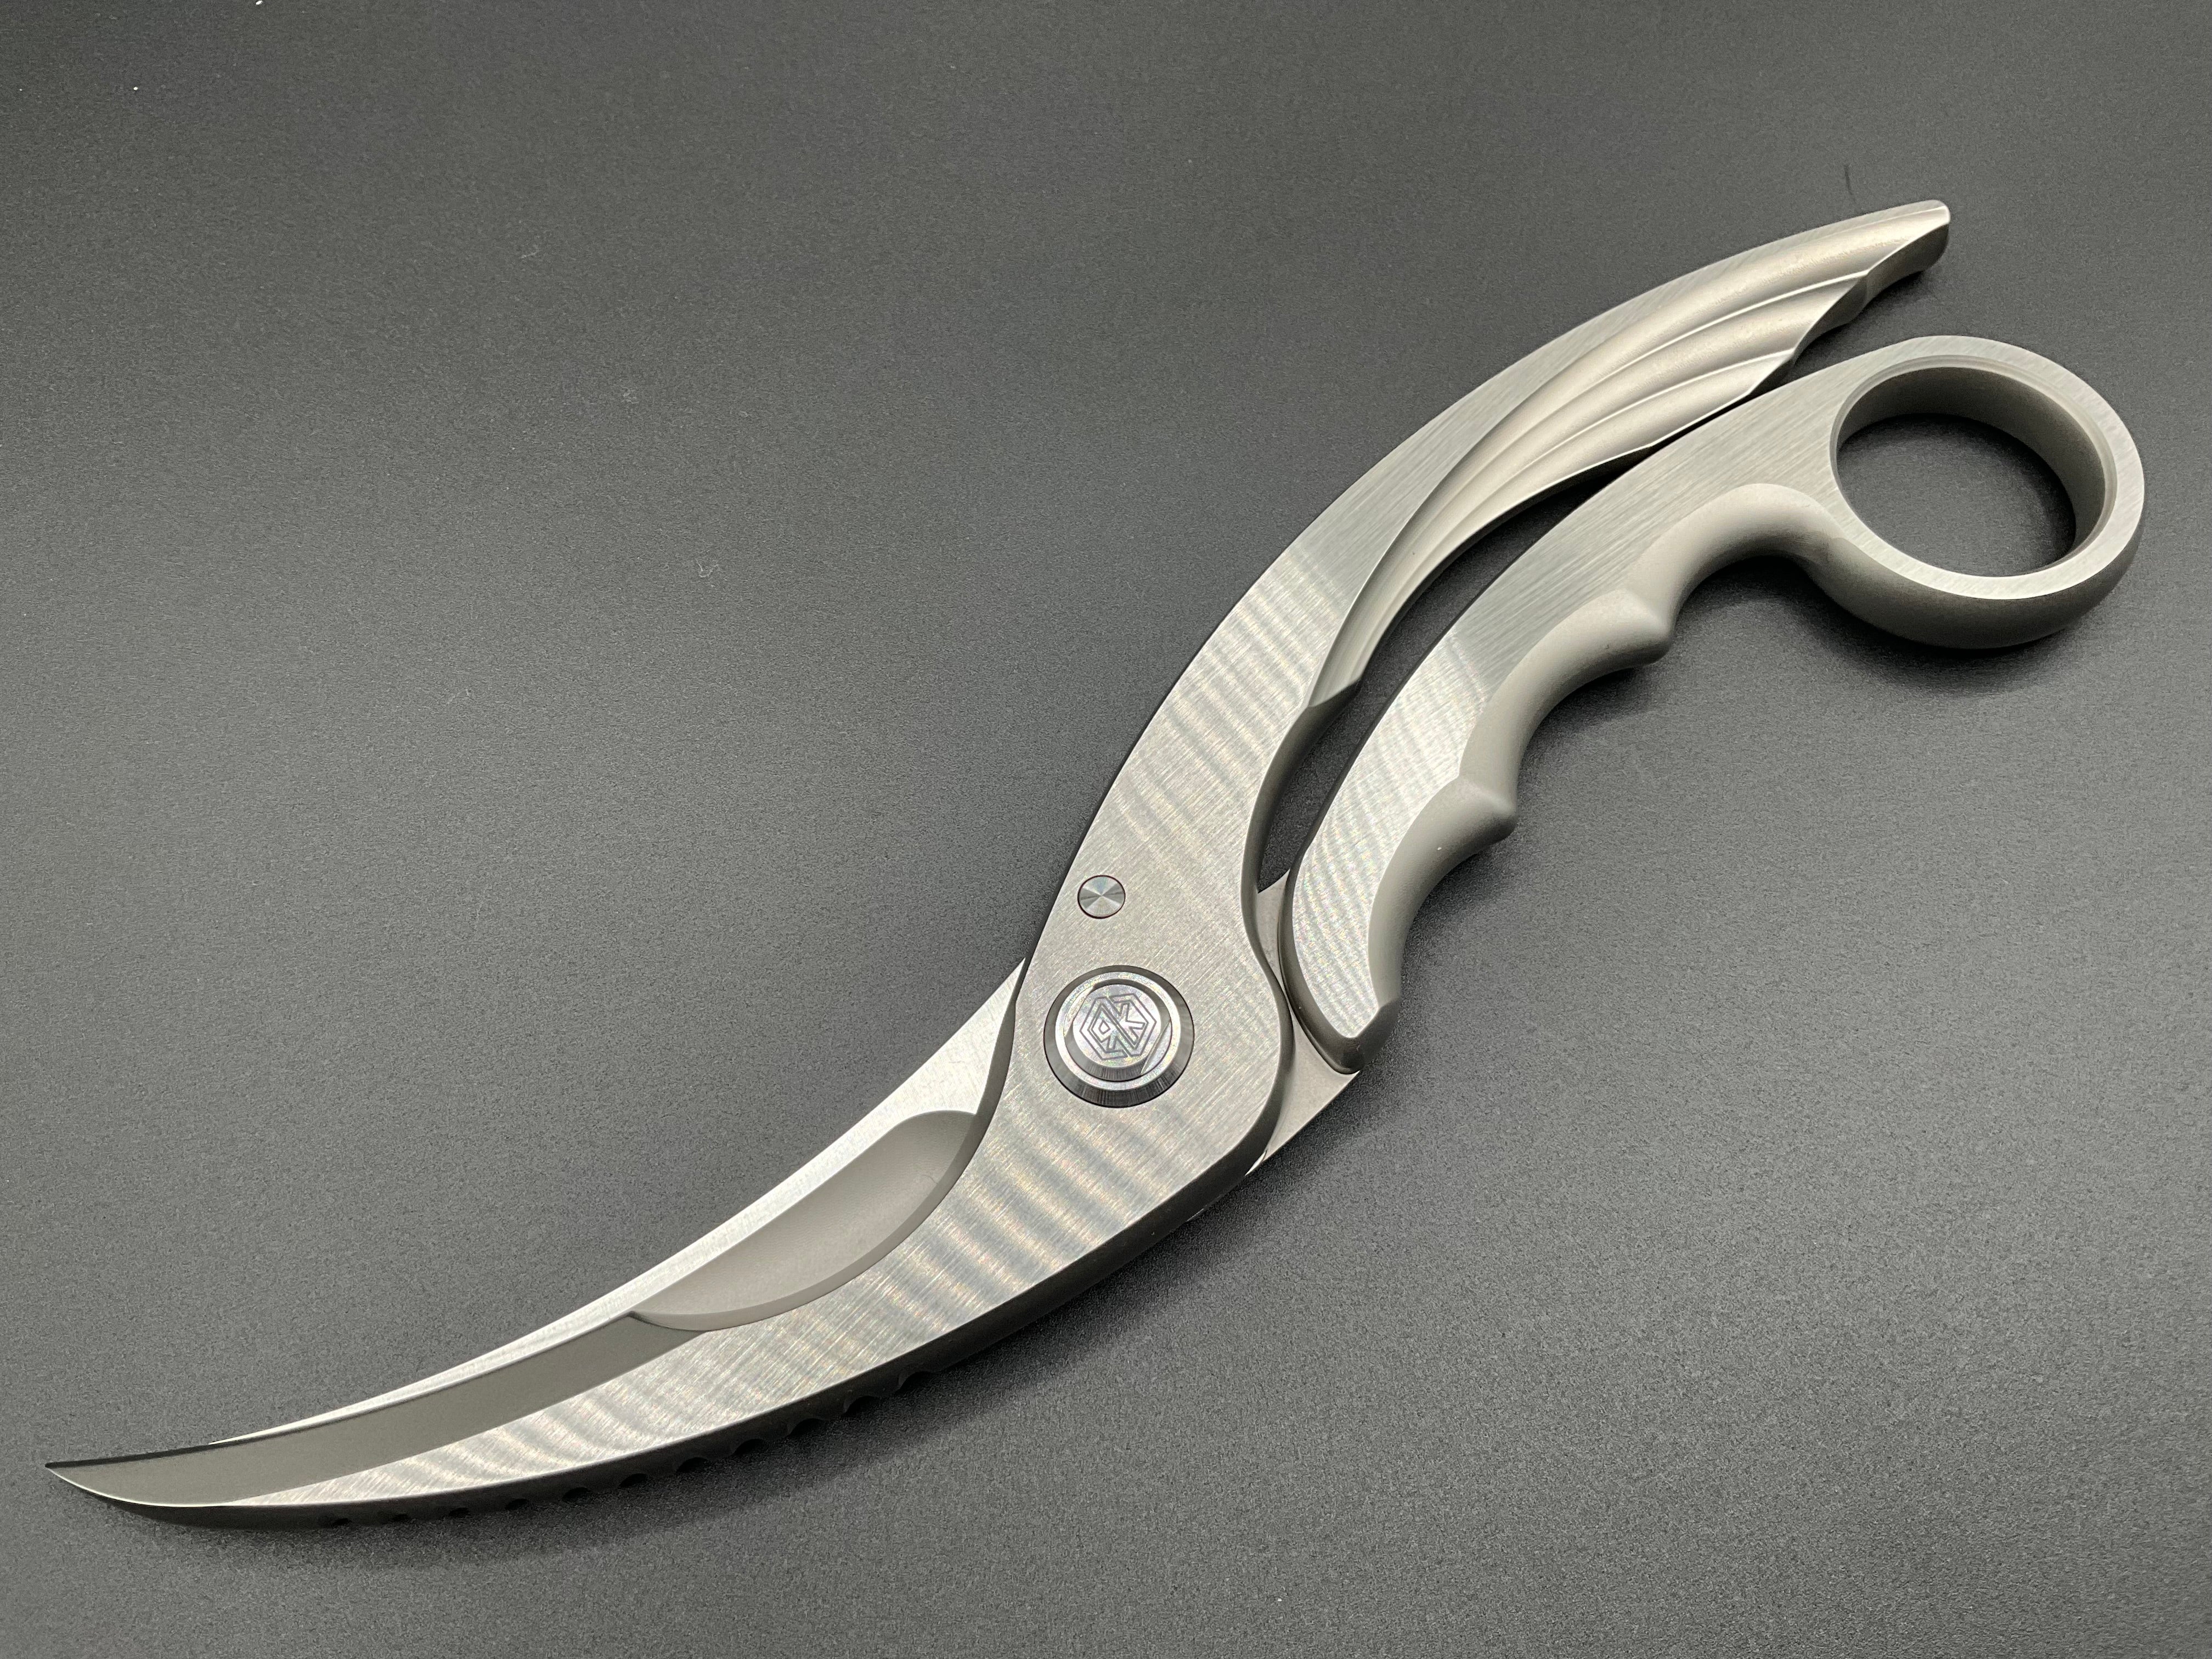 Rike Knife - Tactical Scissors(Improved Version in production)